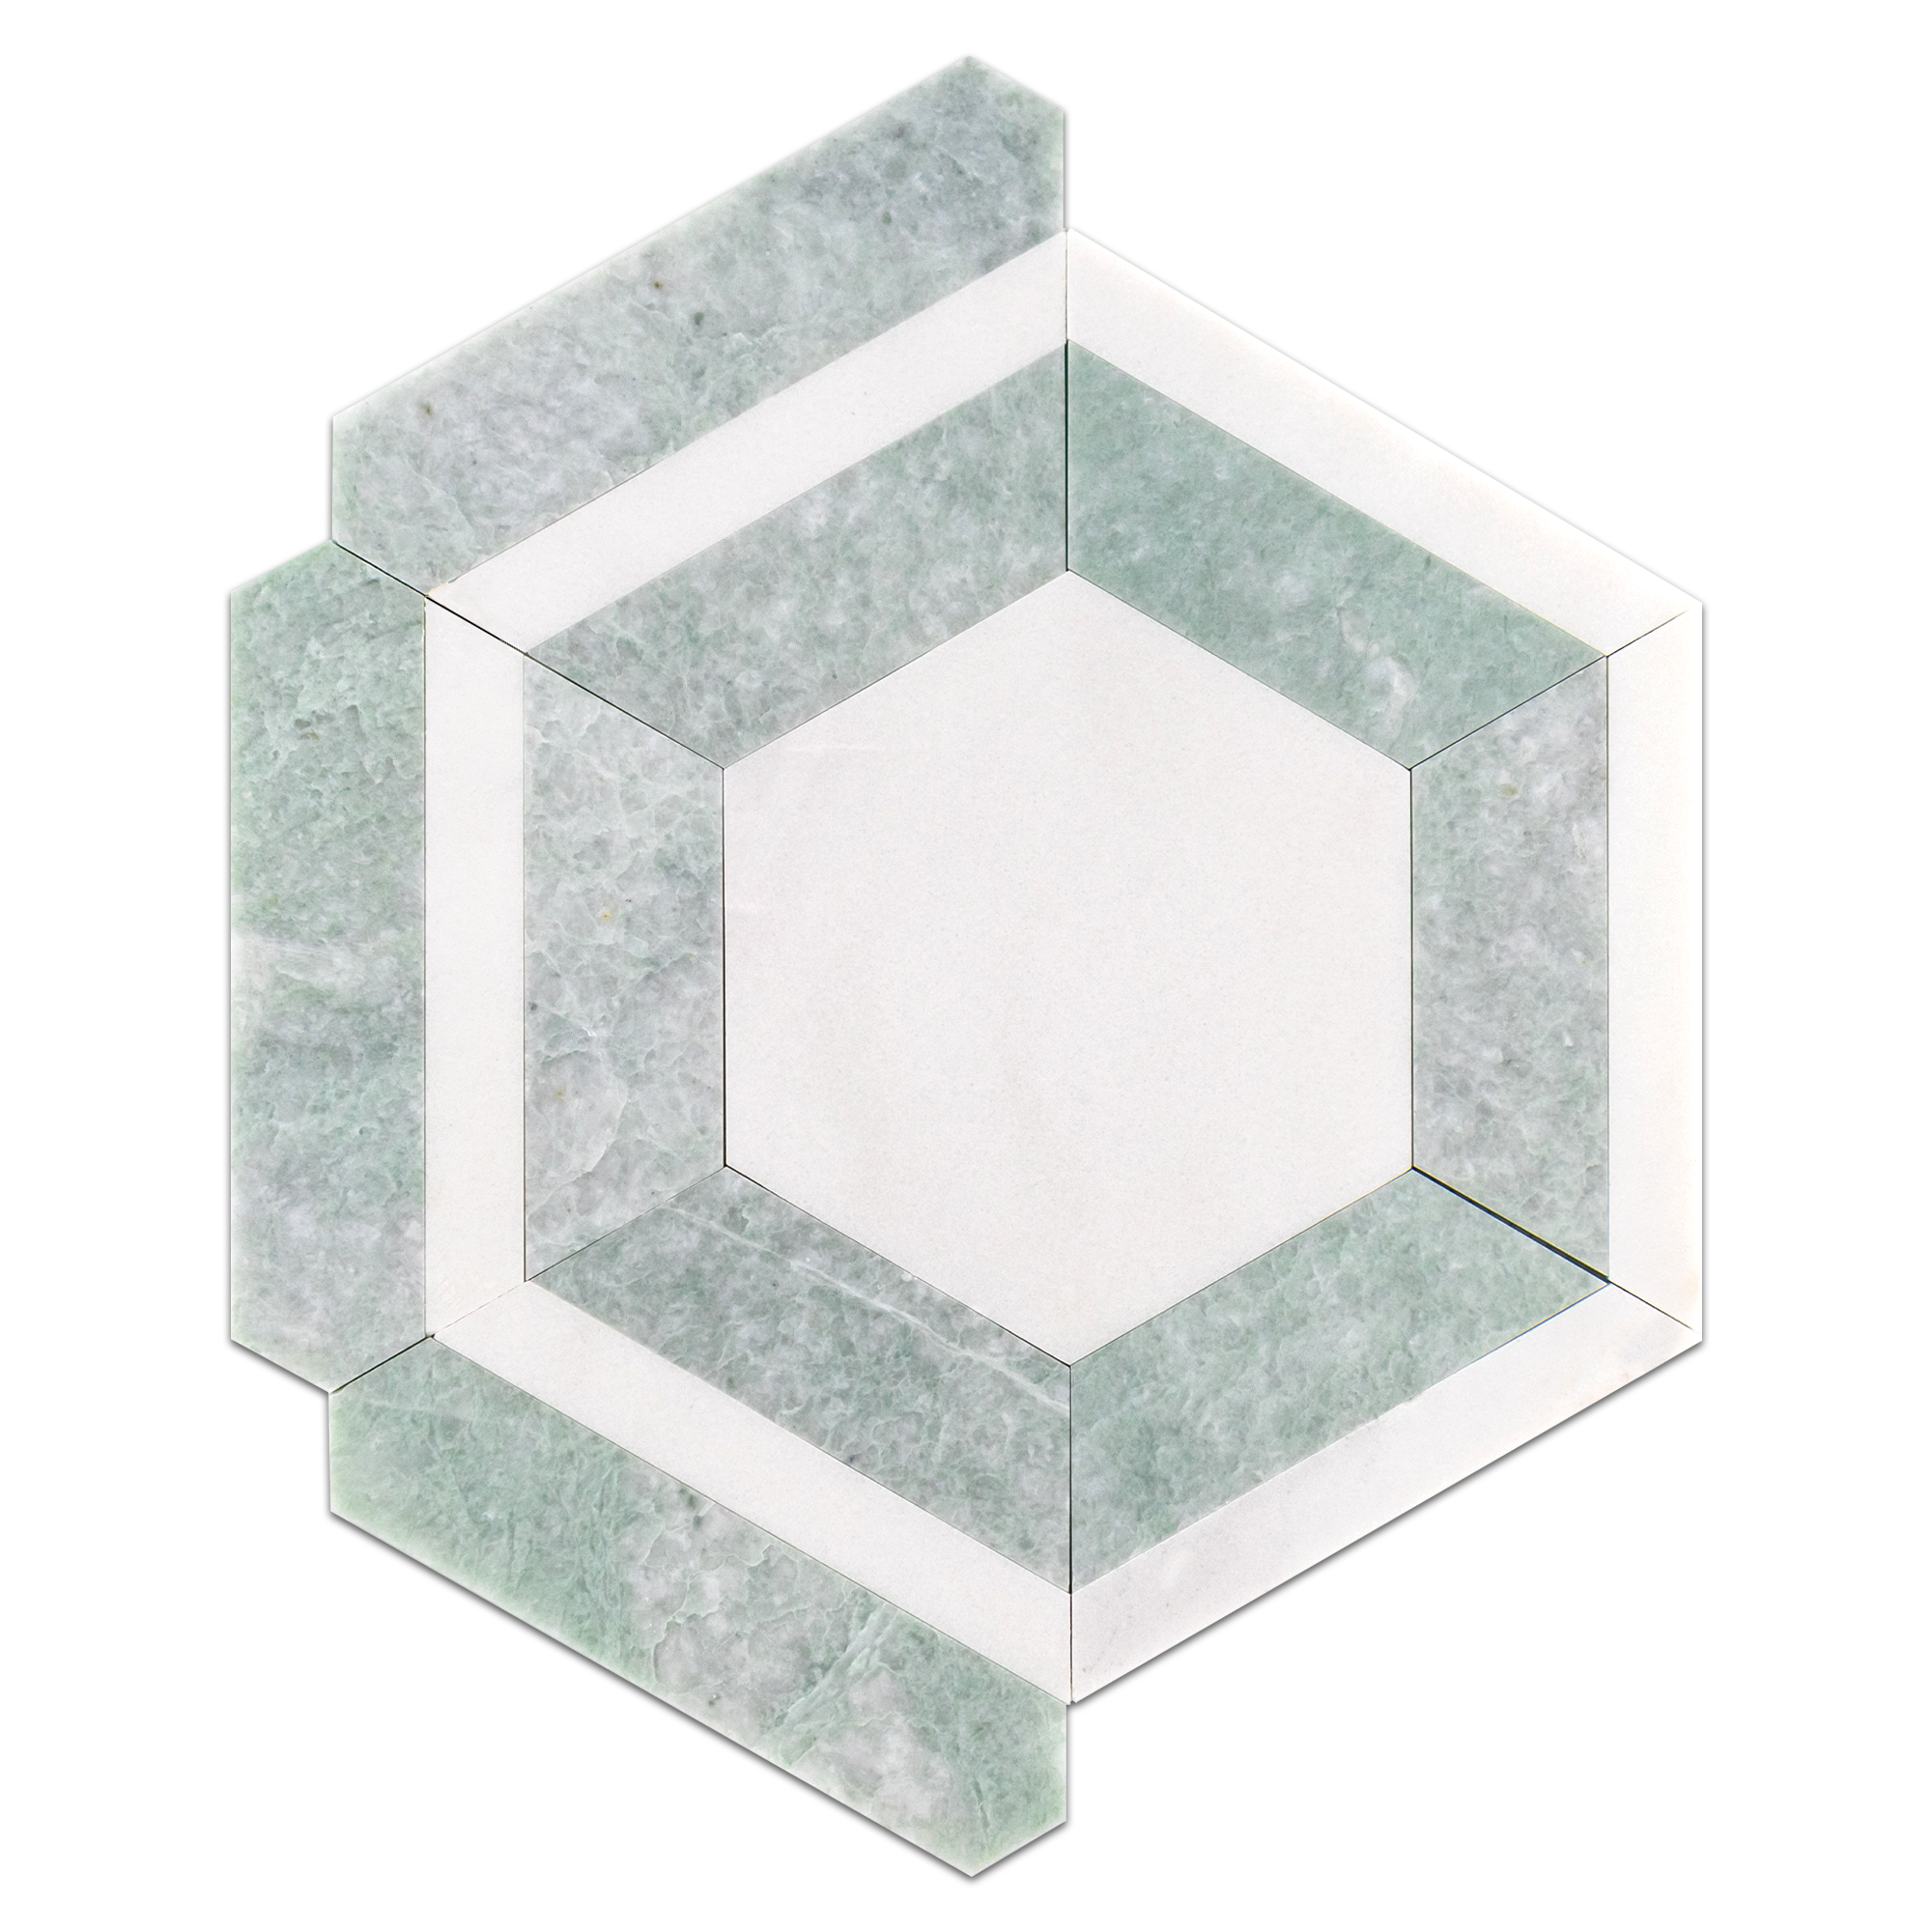 Elon Absolute White and Ming Green Marble Outlined Hexagon Field Mosaic, 11.8125x12.75x0.375, Honed Finish - Surface Group International.